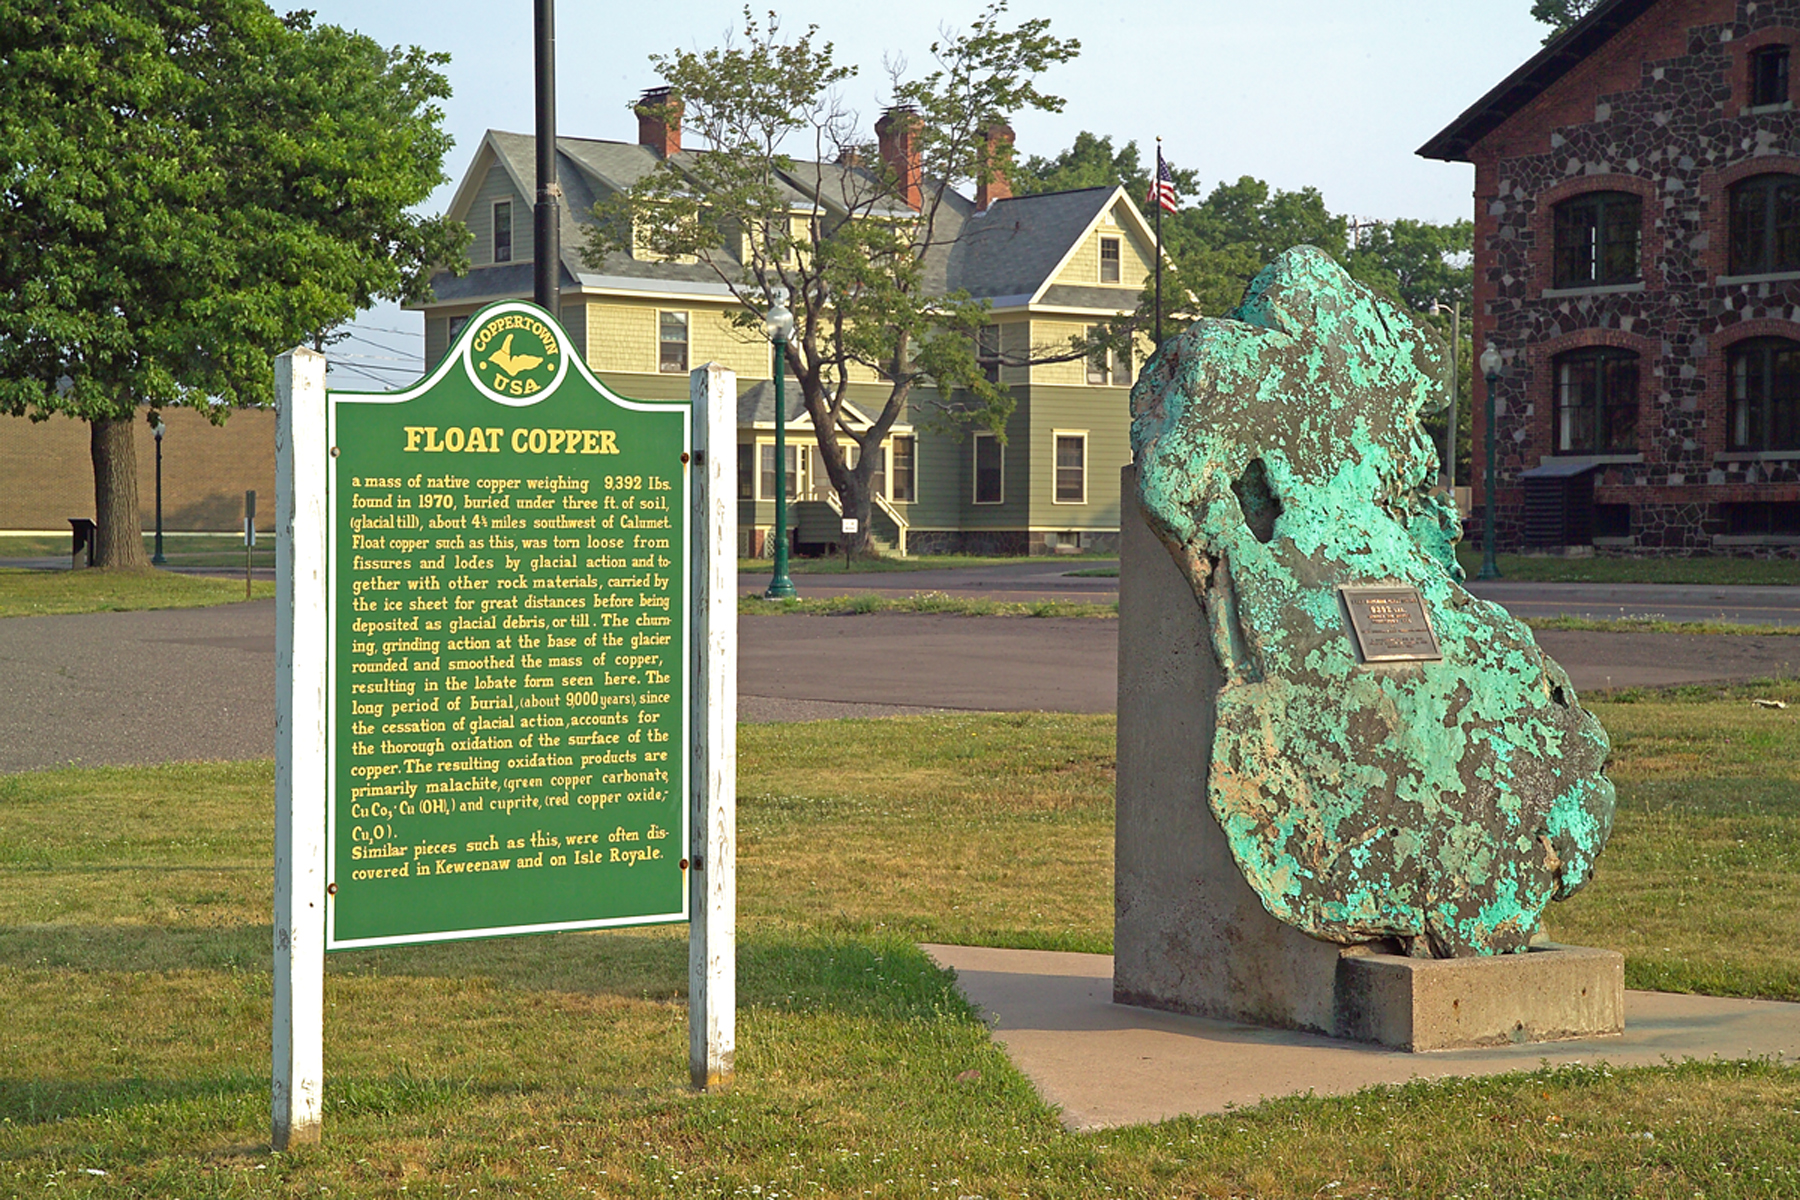 A large, piece of mass copper with a blue-green patina next to a green sign with the title: "Float Copper" make up the foreground. A stone building and wooden structure are in the background with green leaved trees completing the landscape.